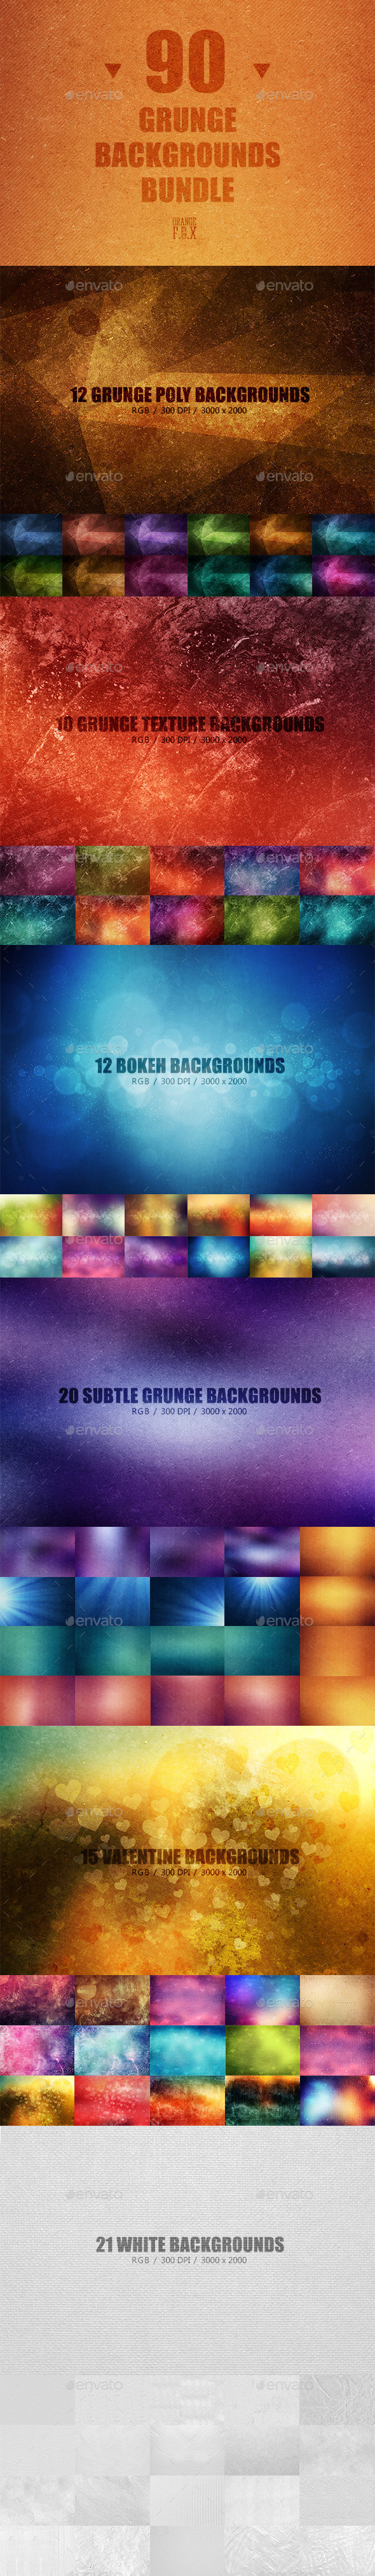 90 20grunge 20backgrounds 20bundle preview